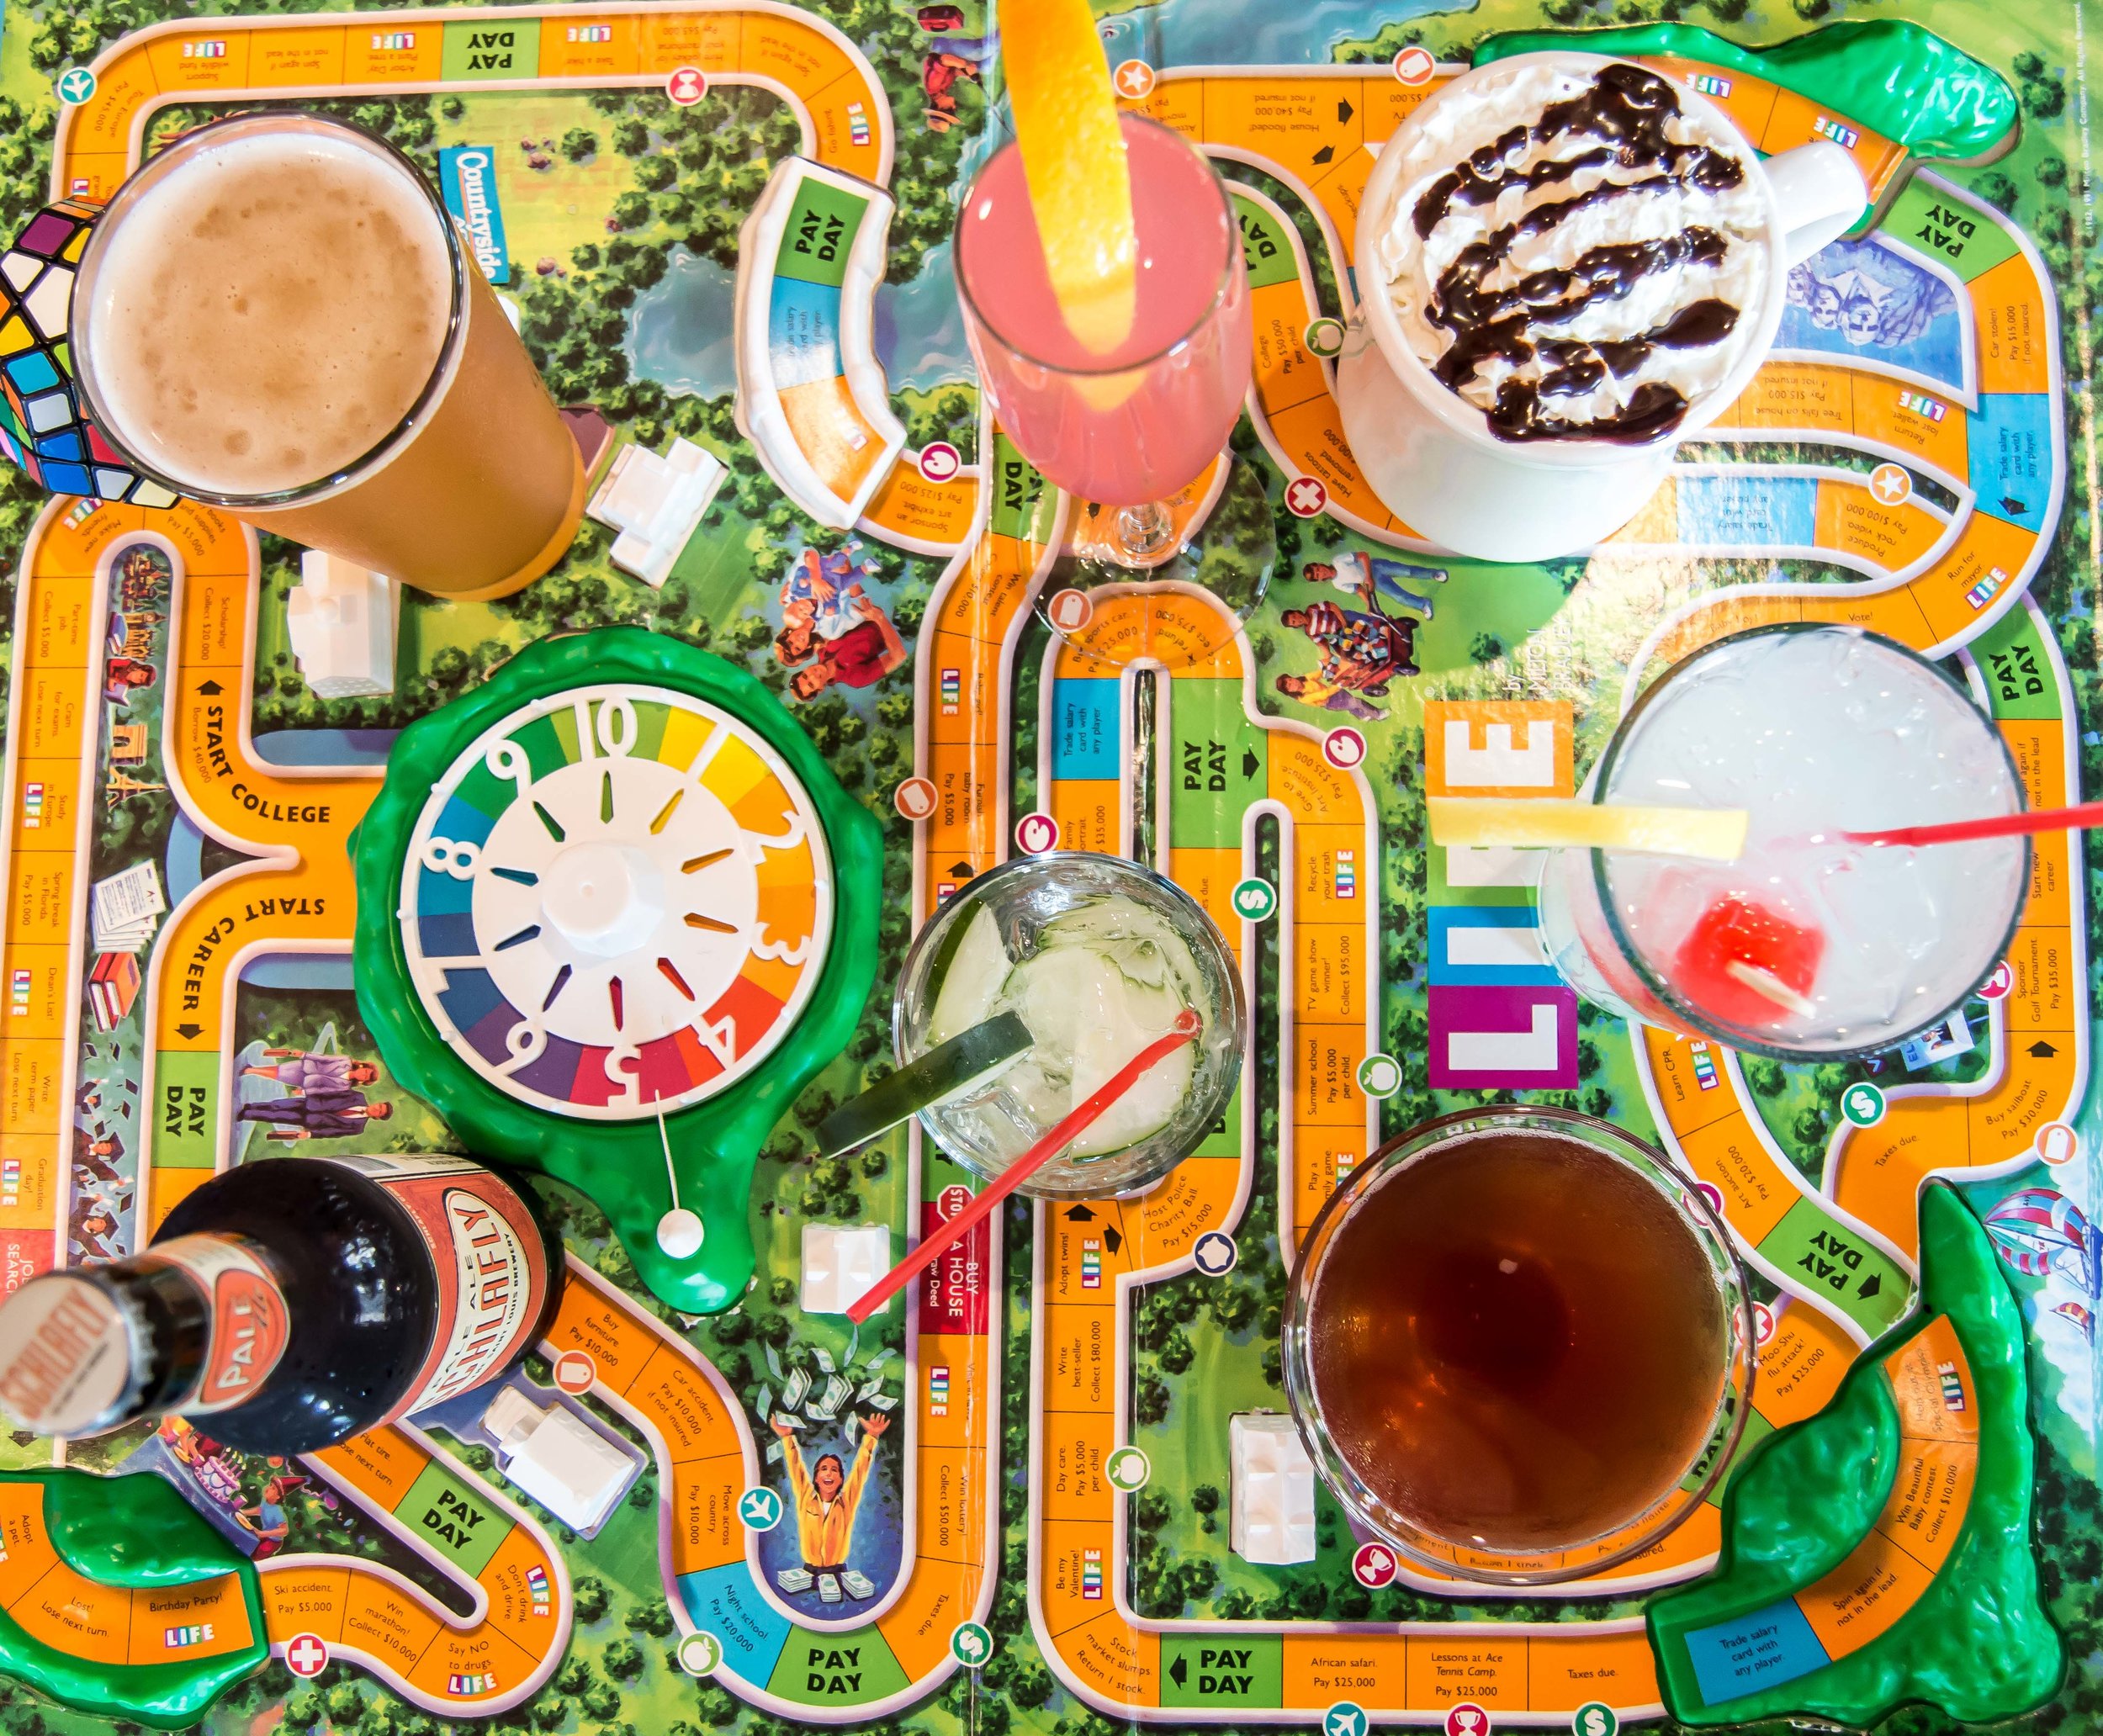 St. Louis Board Game Bar and Cafe